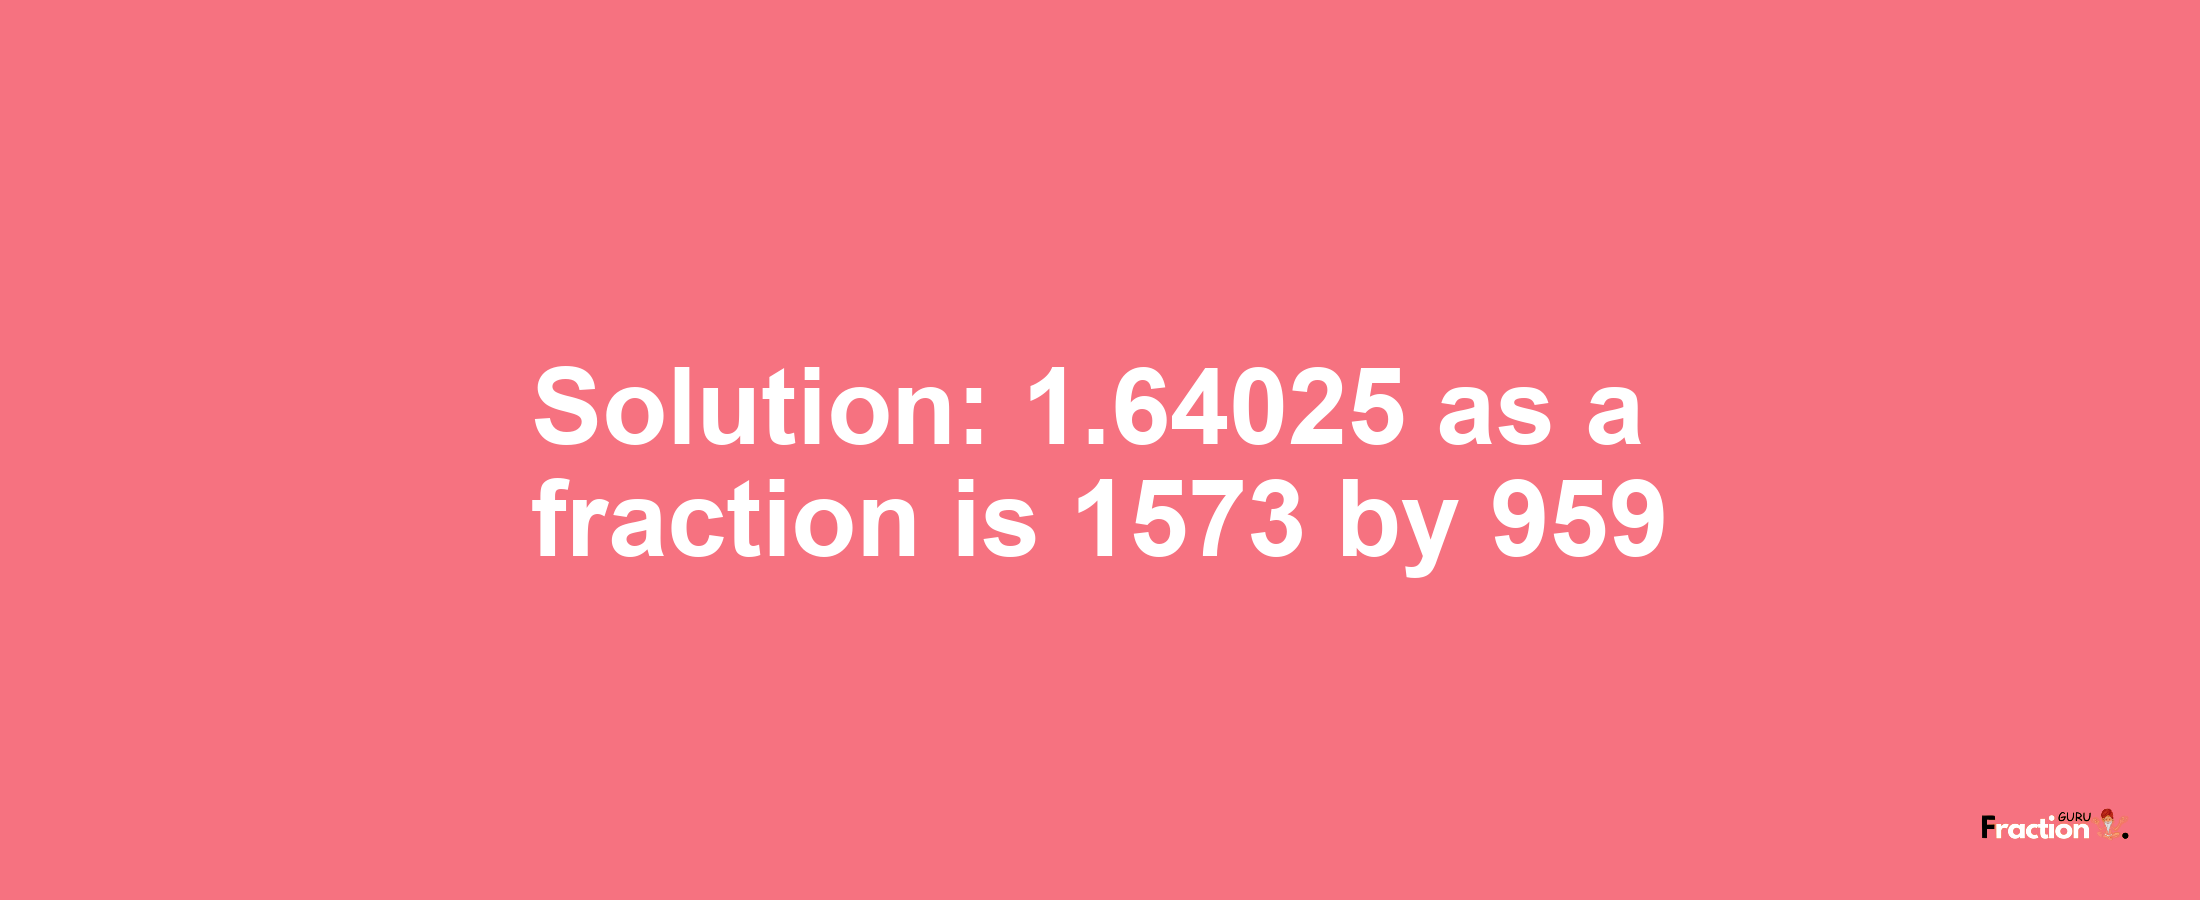 Solution:1.64025 as a fraction is 1573/959